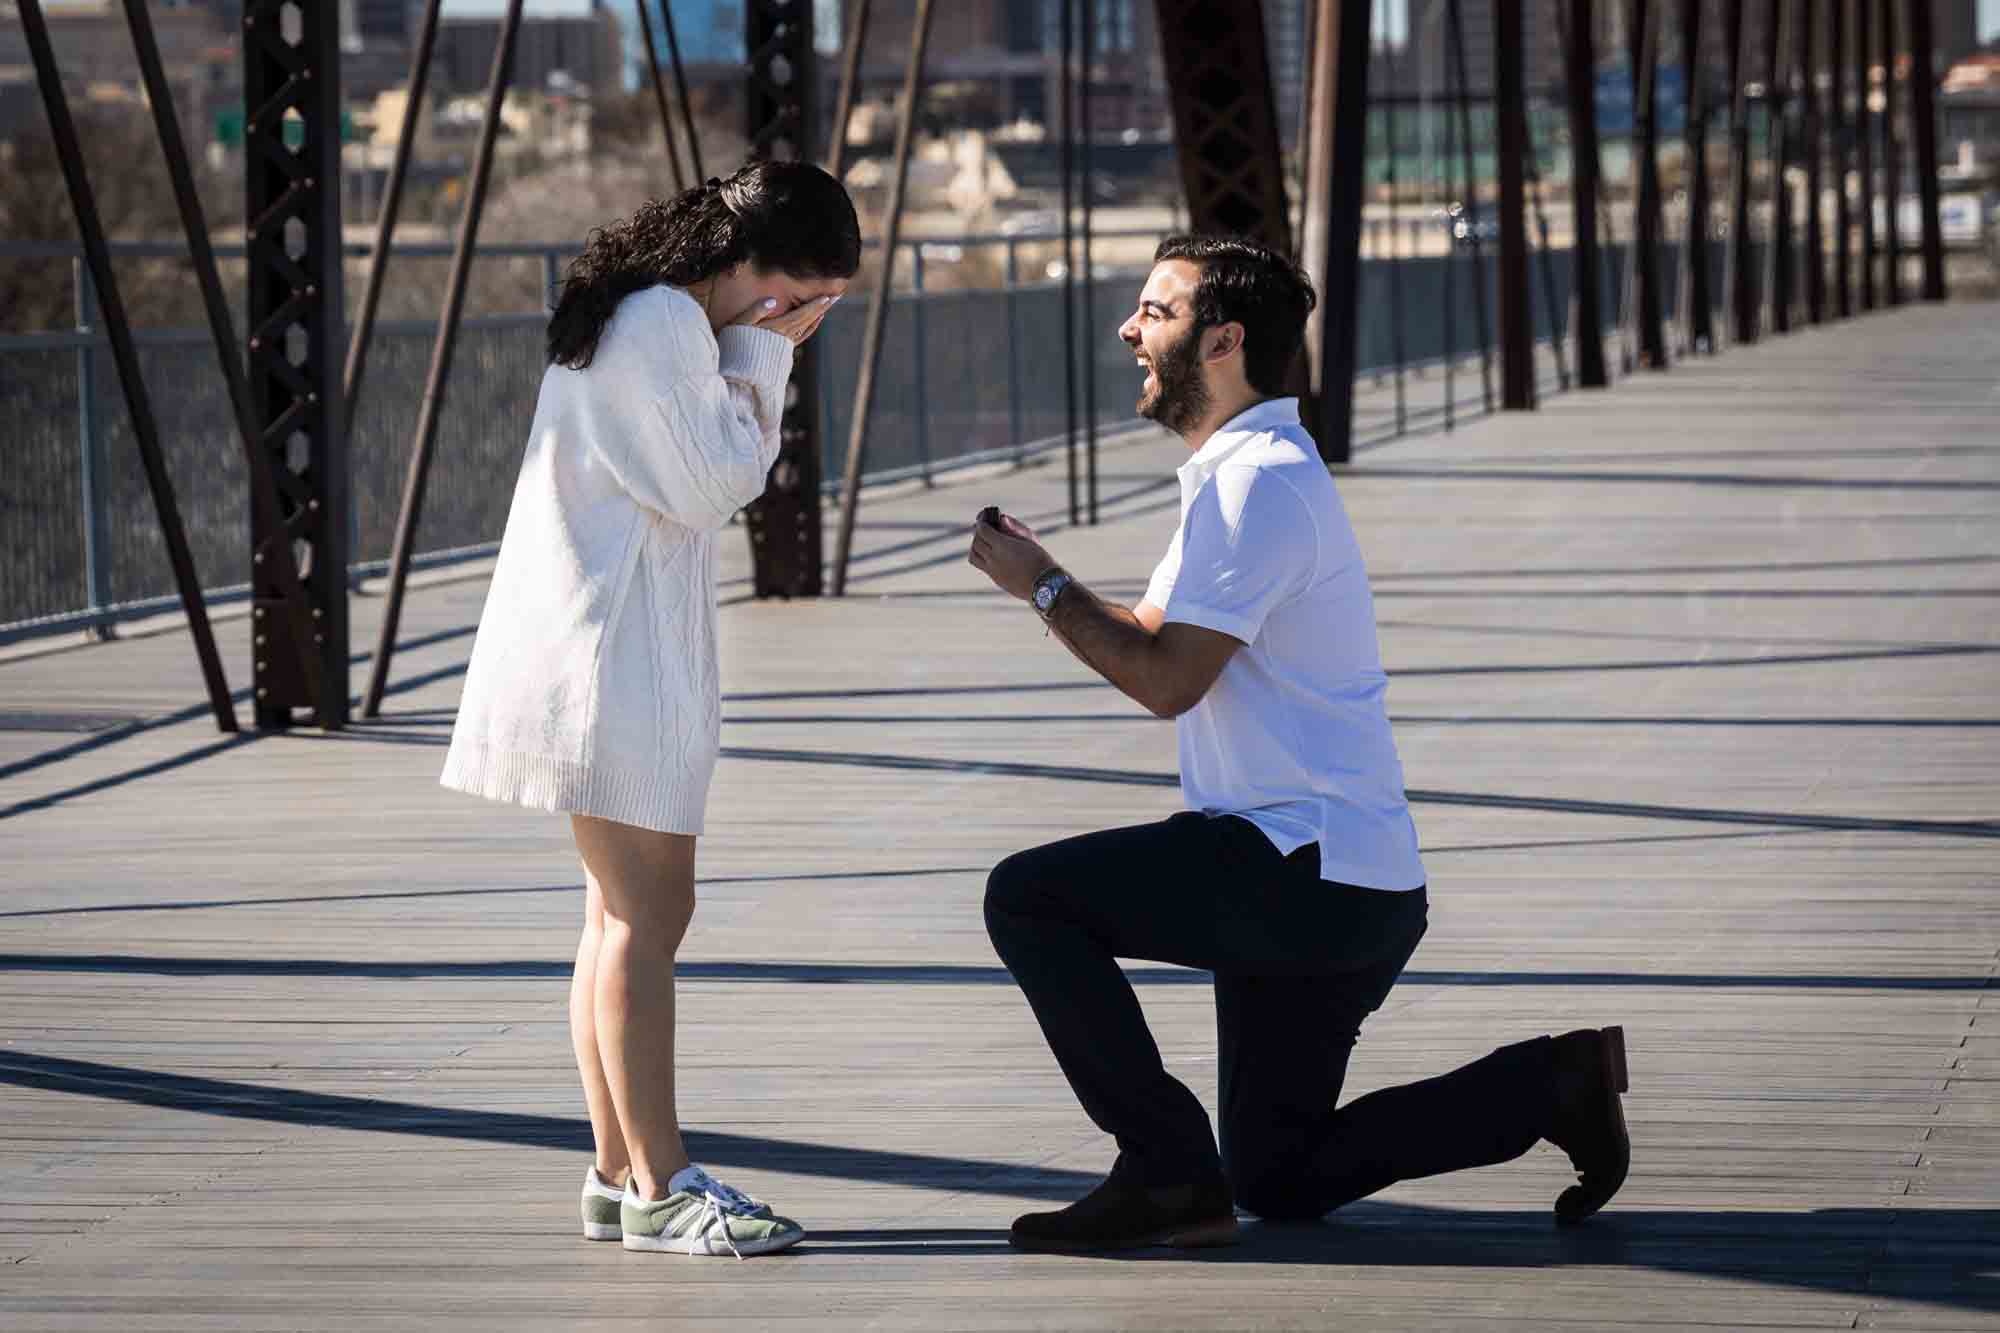 Man on one knee in front of woman for a Hays Street Bridge proposal